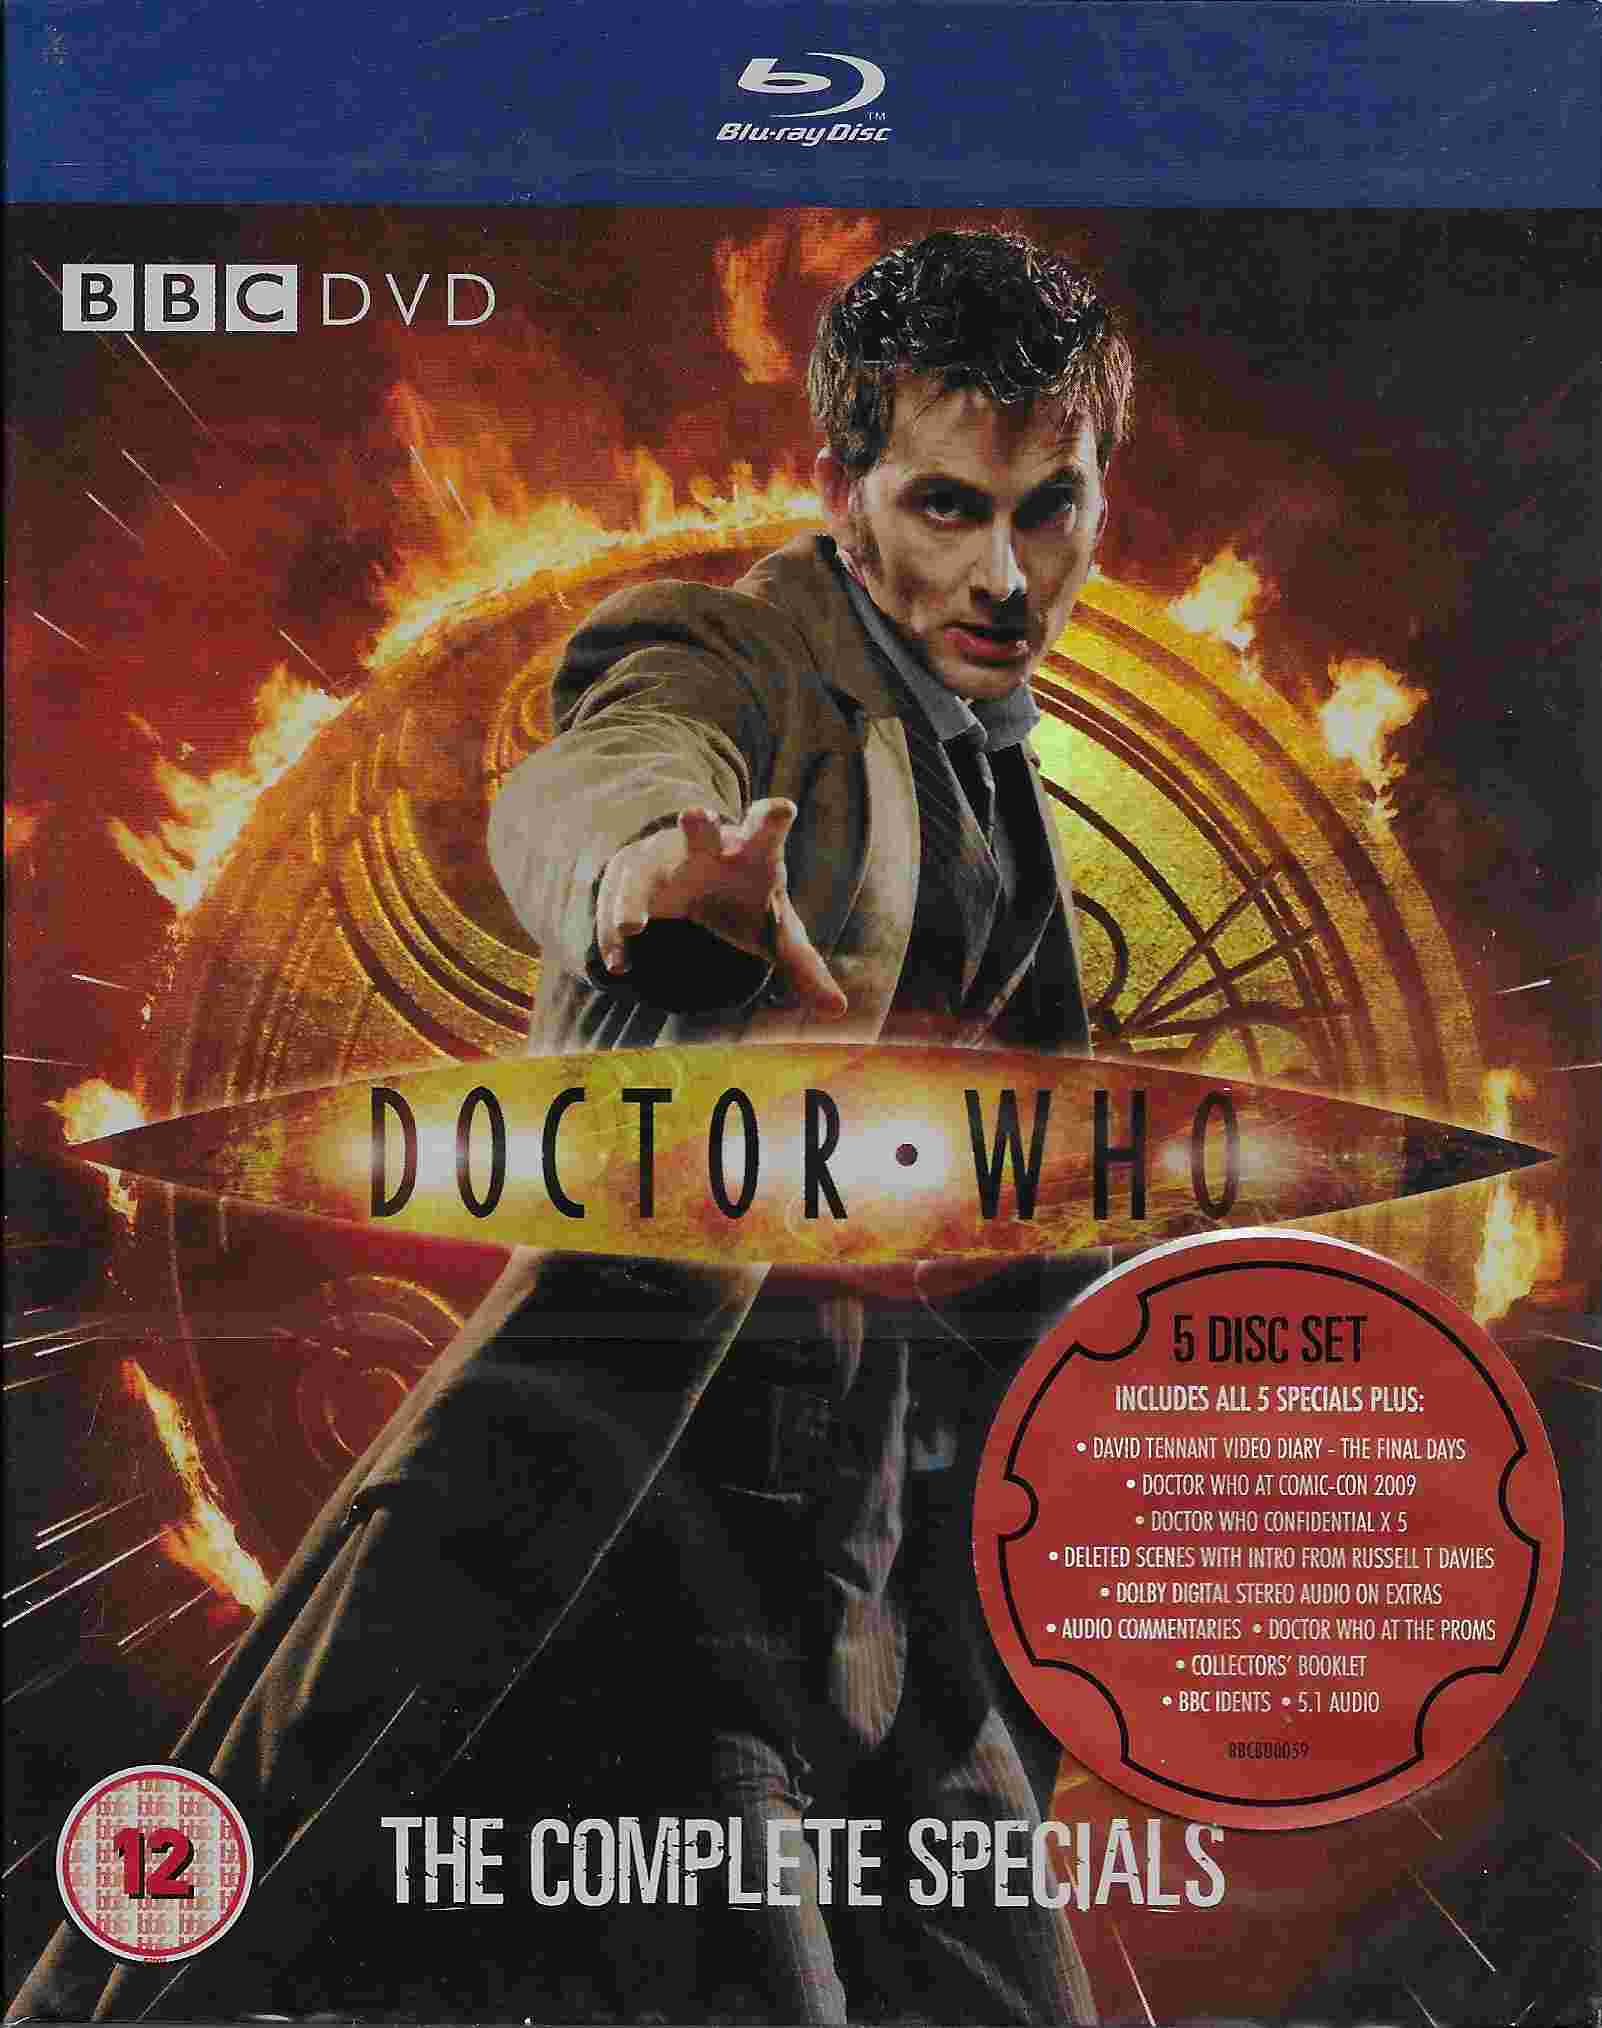 Picture of Doctor Who - The complete specials by artist Russell T Davies / Gareth Roberts / Phil Ford from the BBC blu-rays - Records and Tapes library